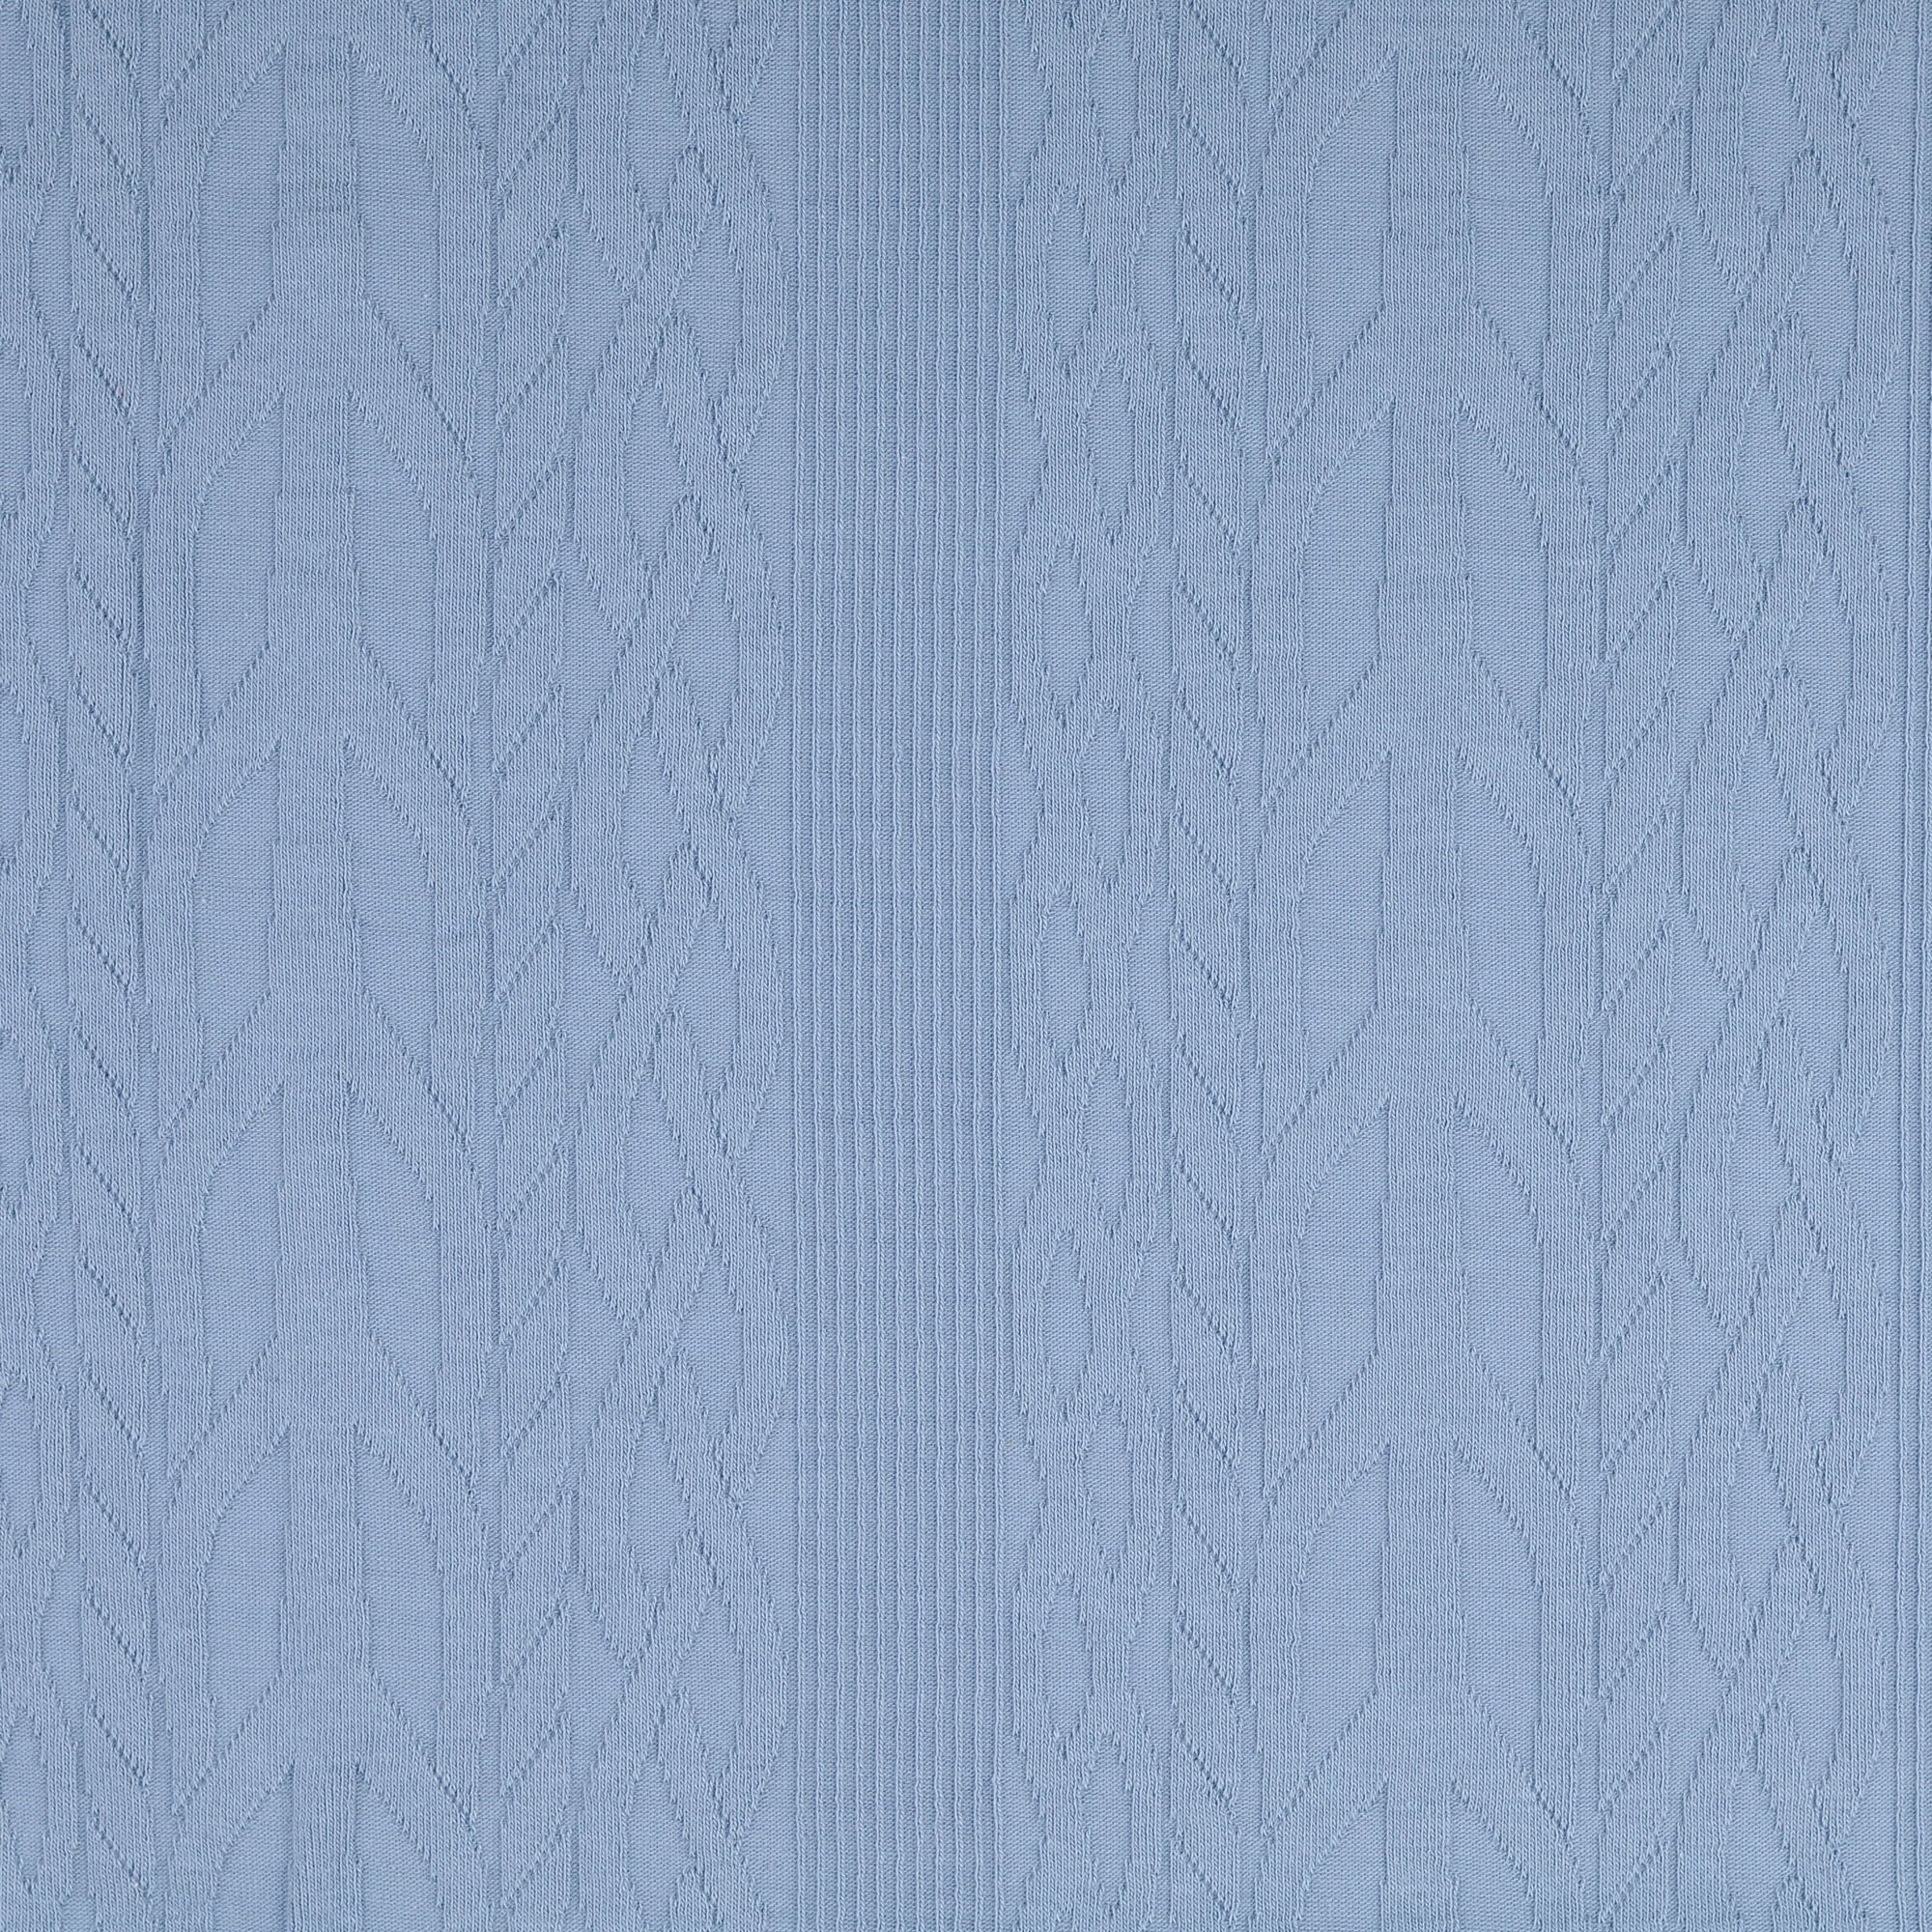 REMNANT 0.39 metre - Cotton Cable Knit Fabric in Light Blue